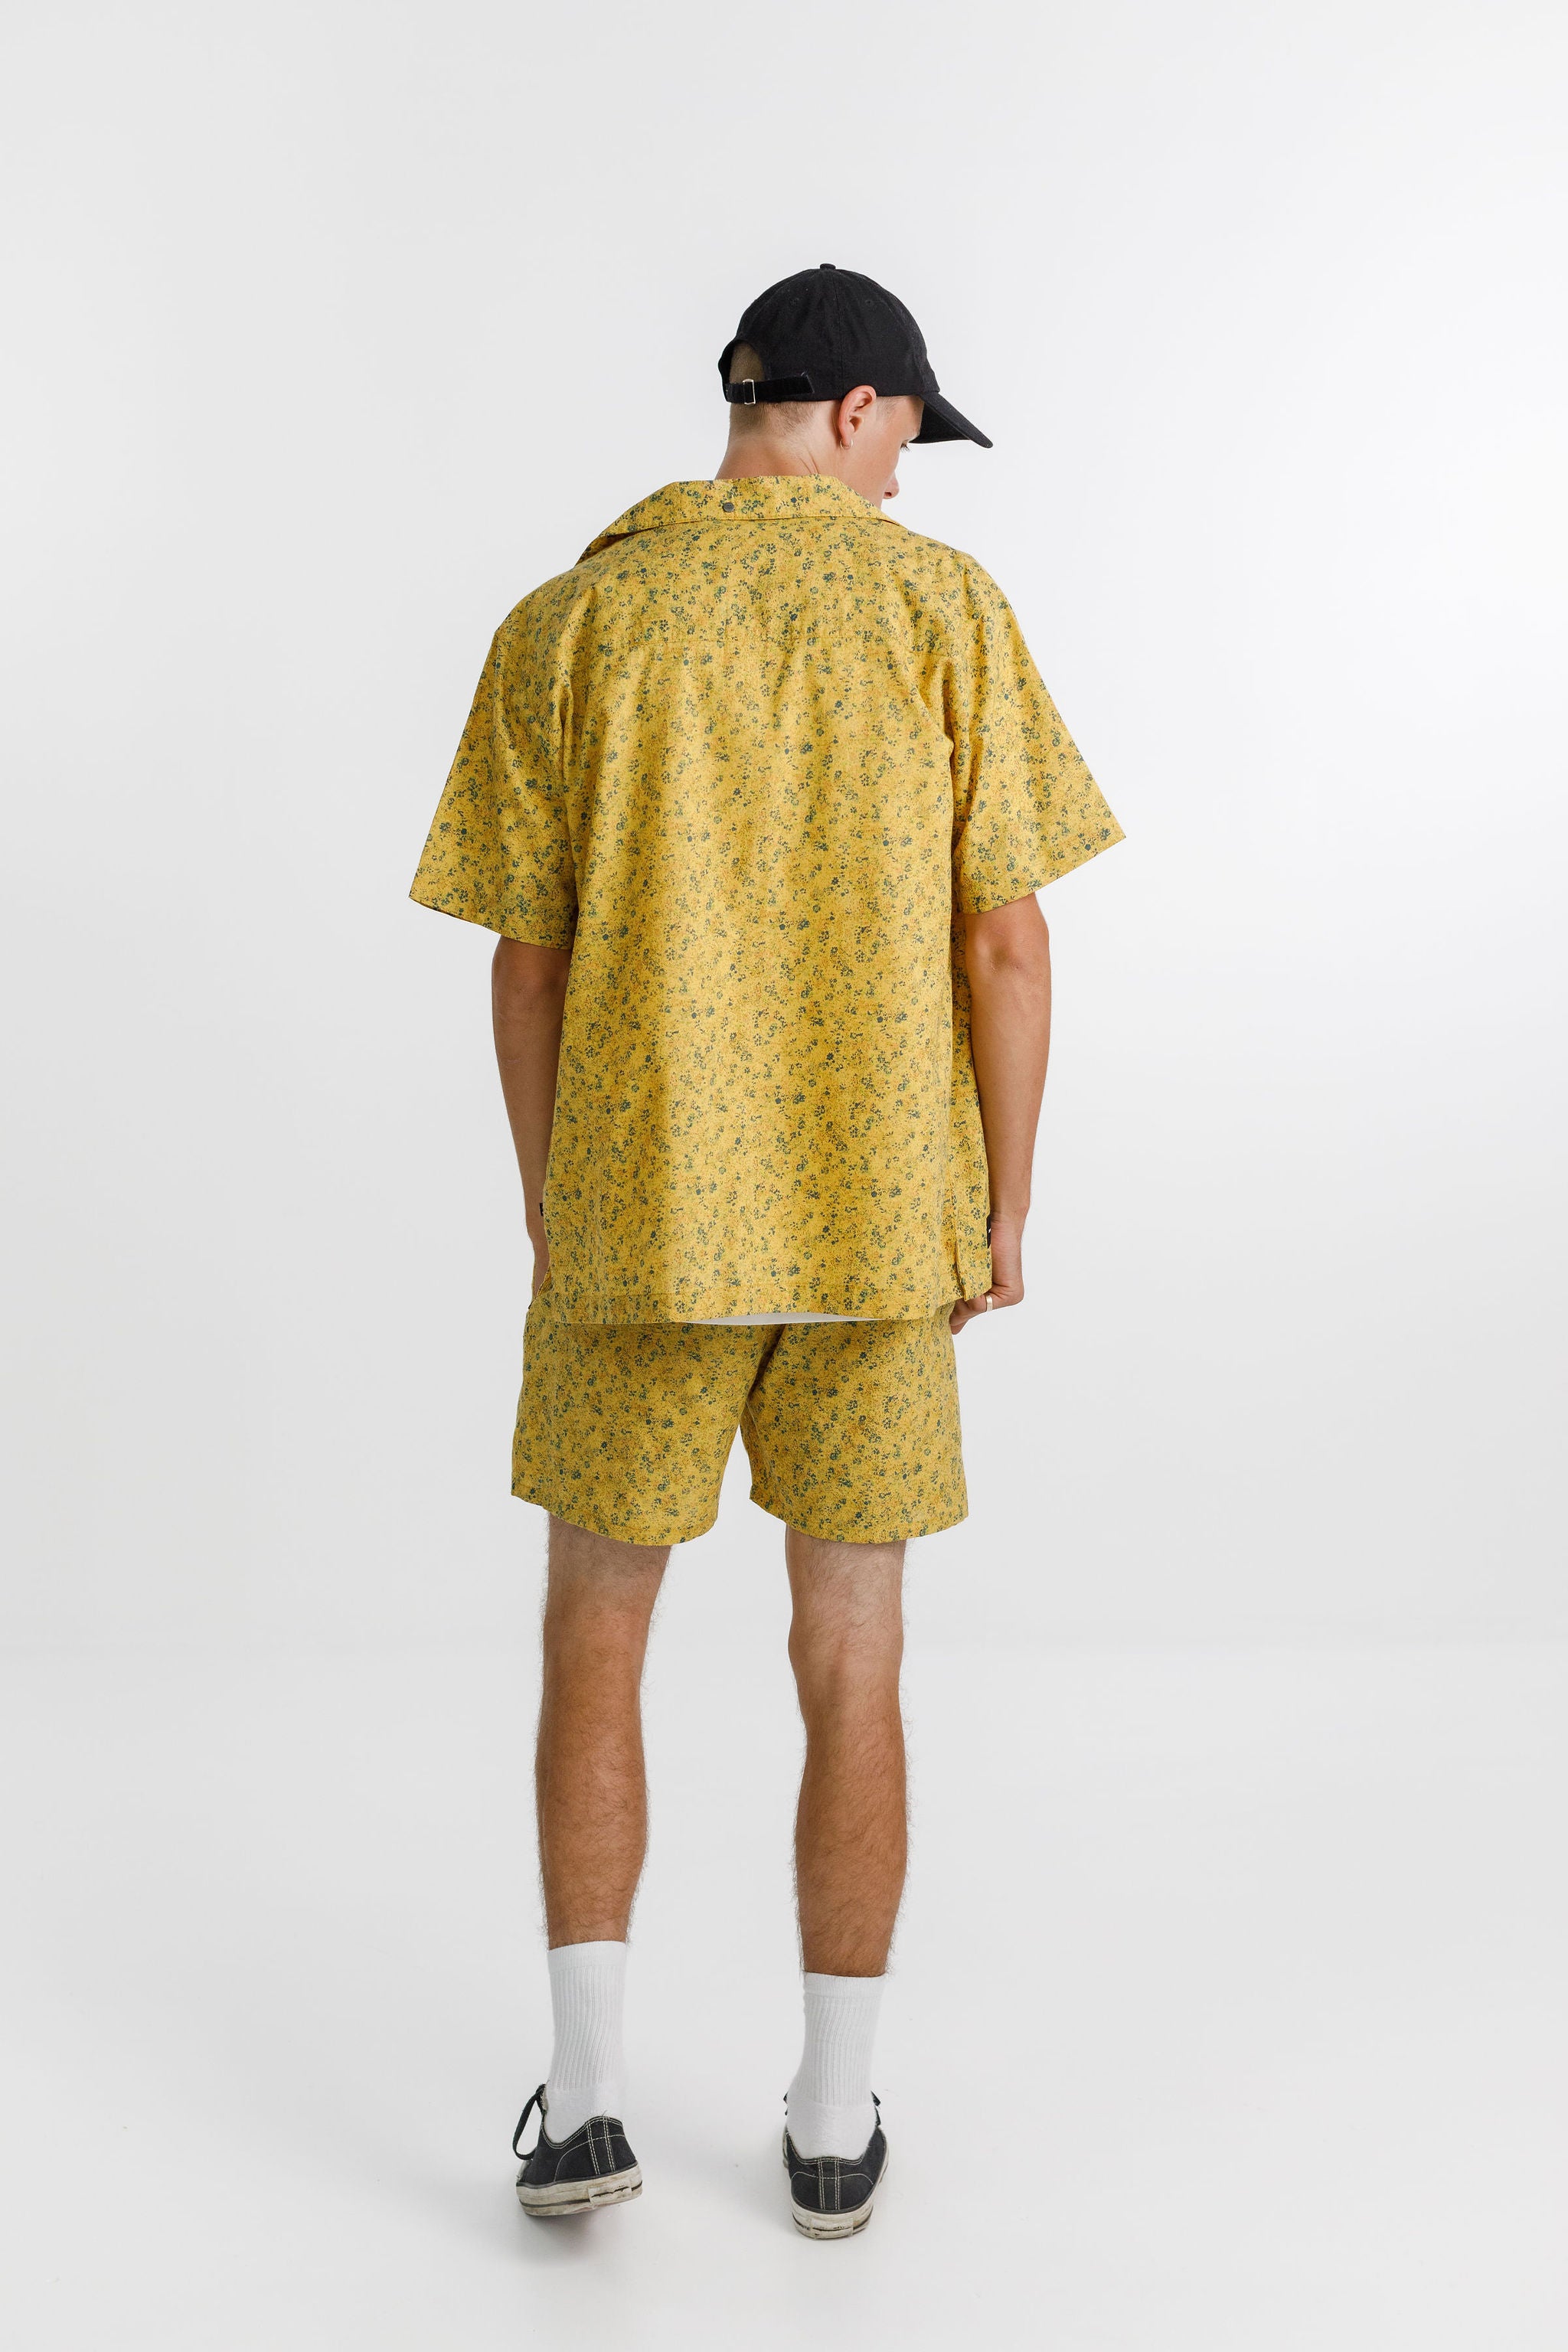 Trope Shirt - Sale - Mustard with Chest Embroidery